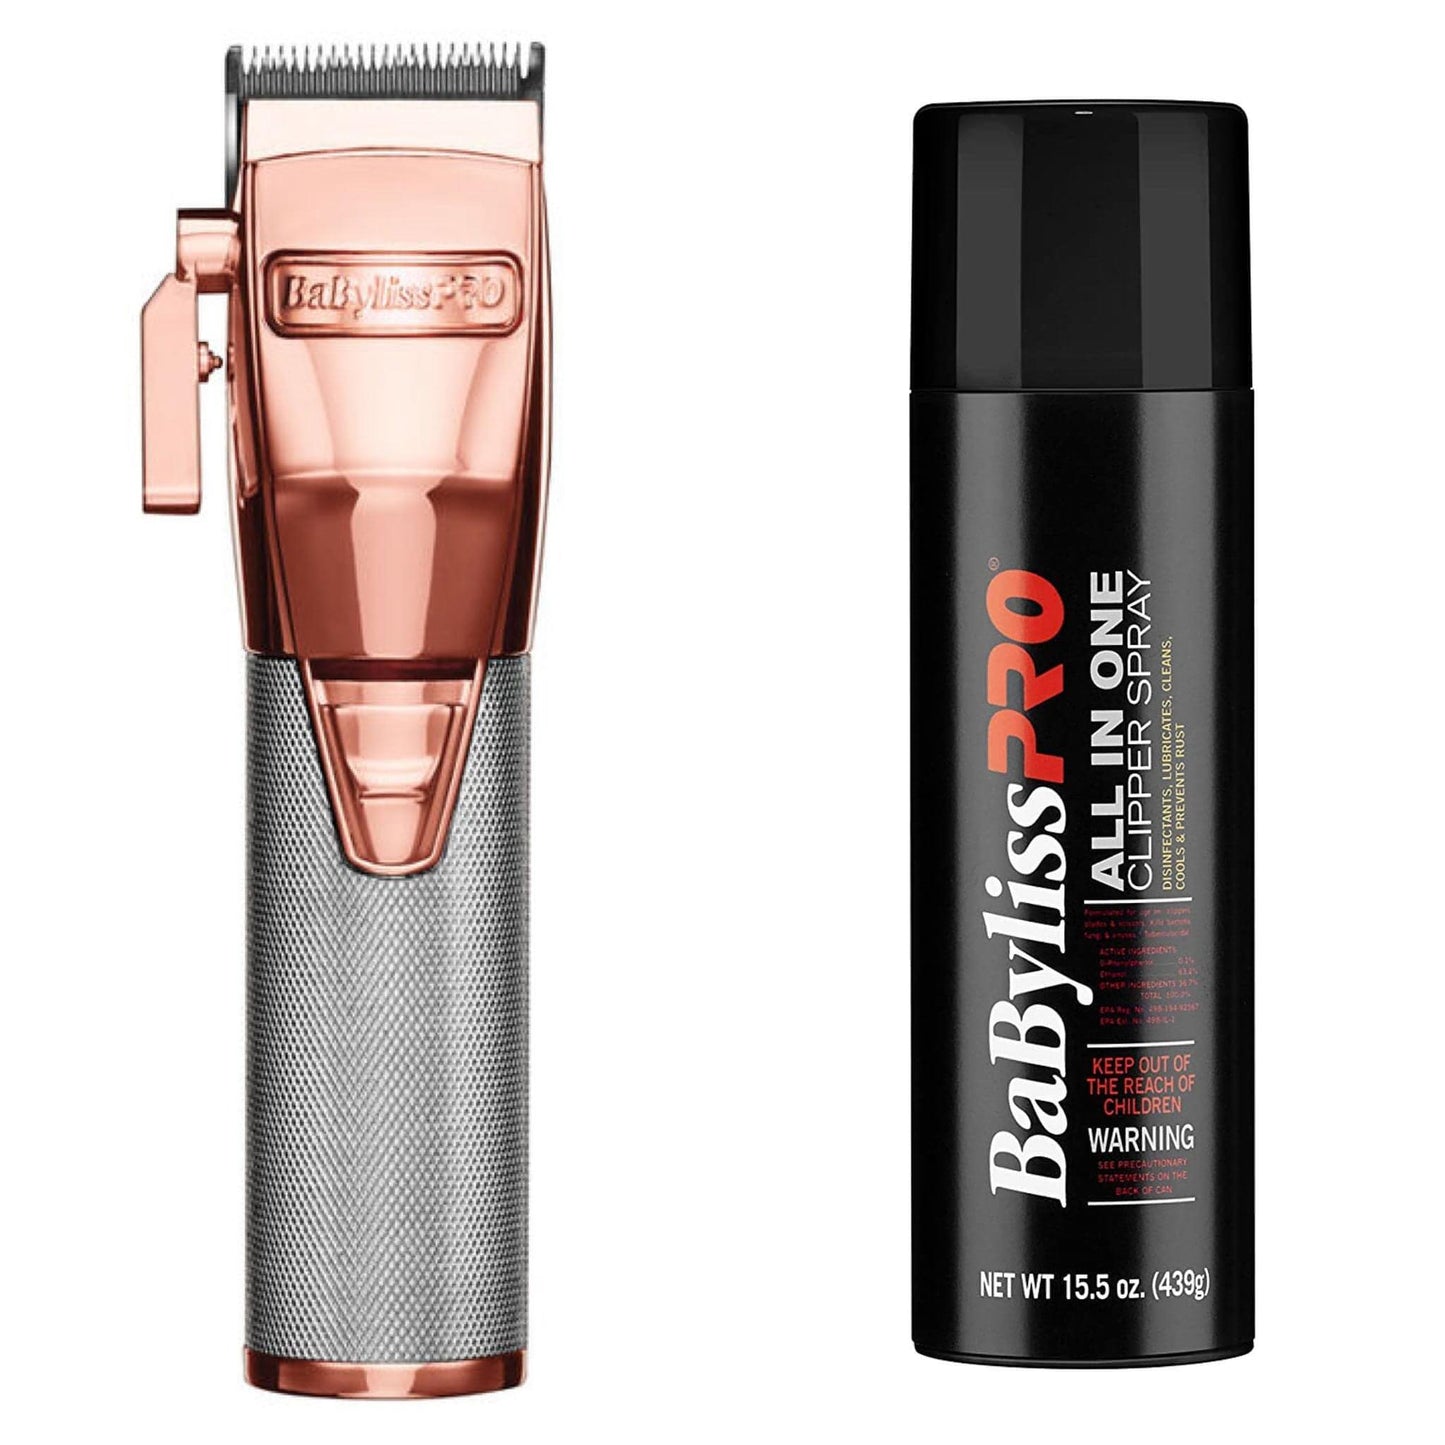 BaByliss Pro FX870 Clippers + Clipper Spray Bundle (Combo)-Clipper Vault